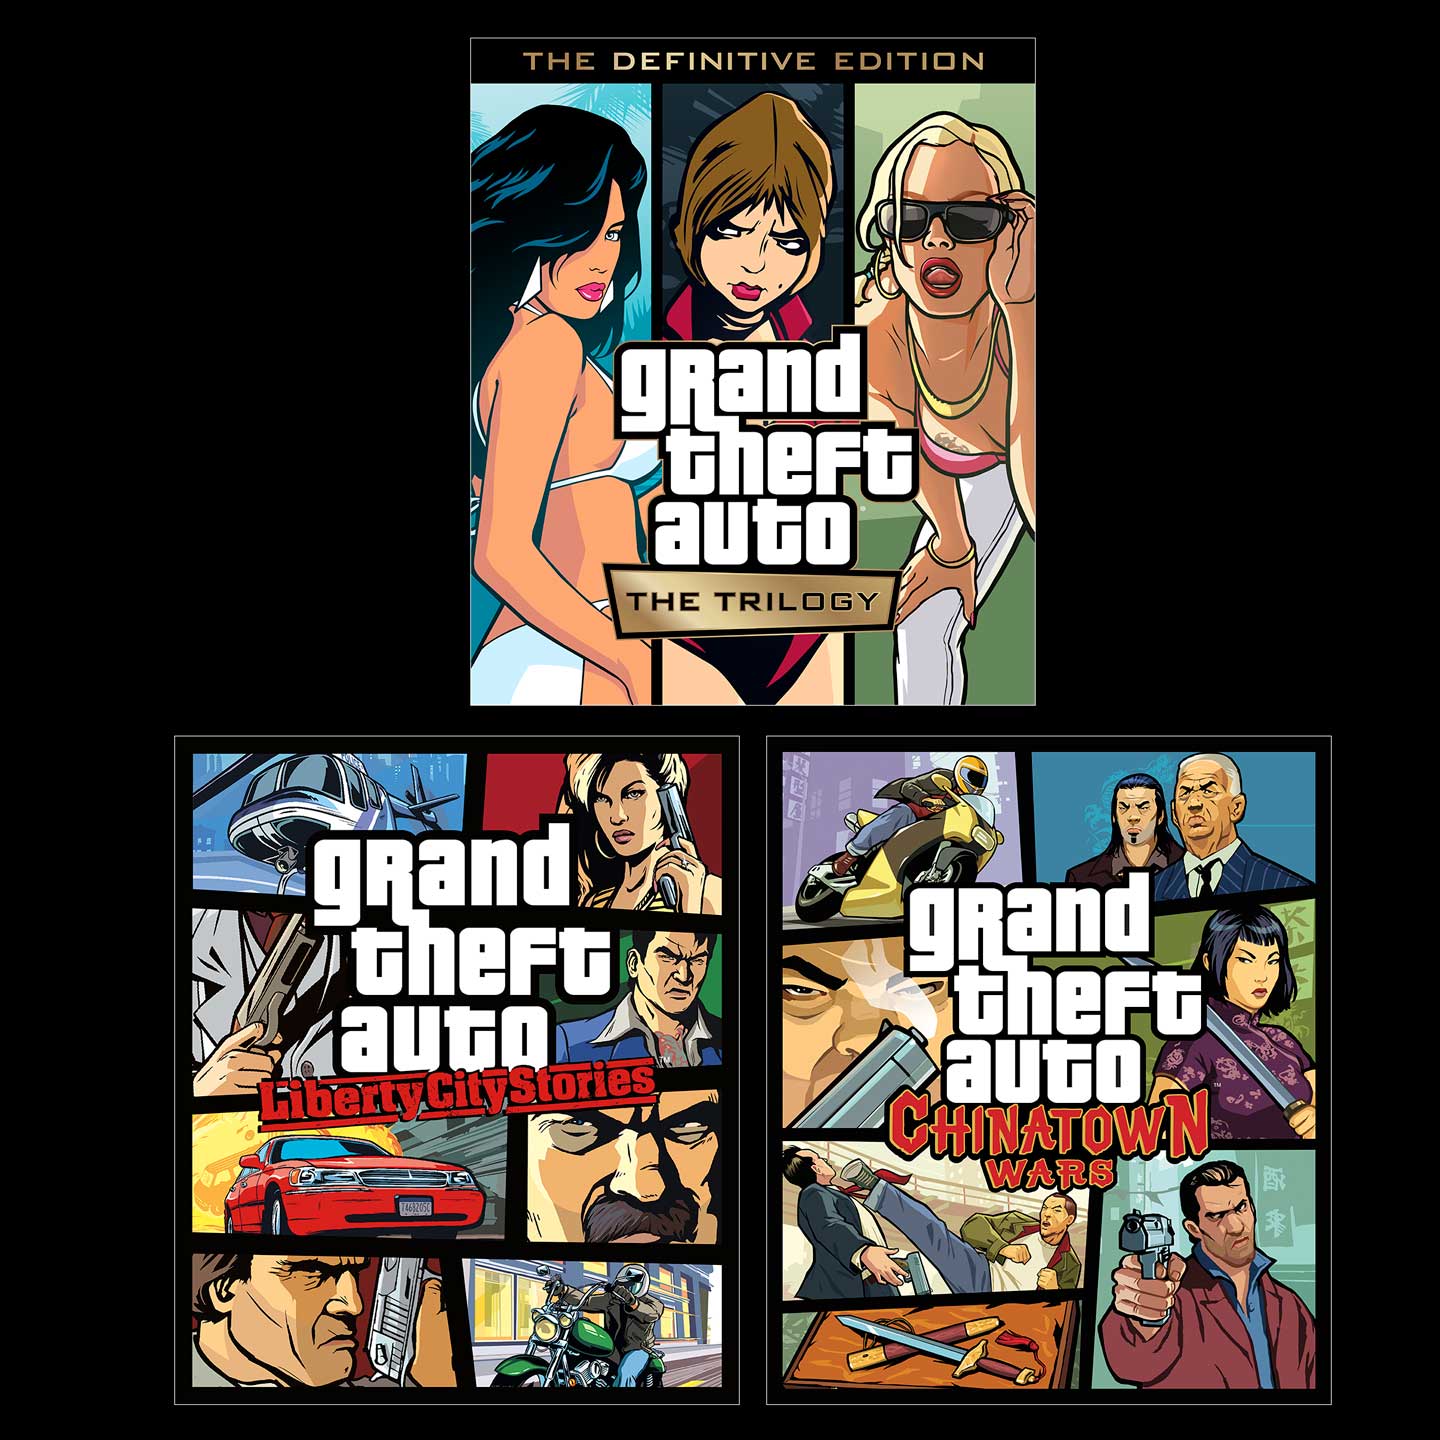 Liberty City Stories and Chinatown Wars Now Available With GTA+